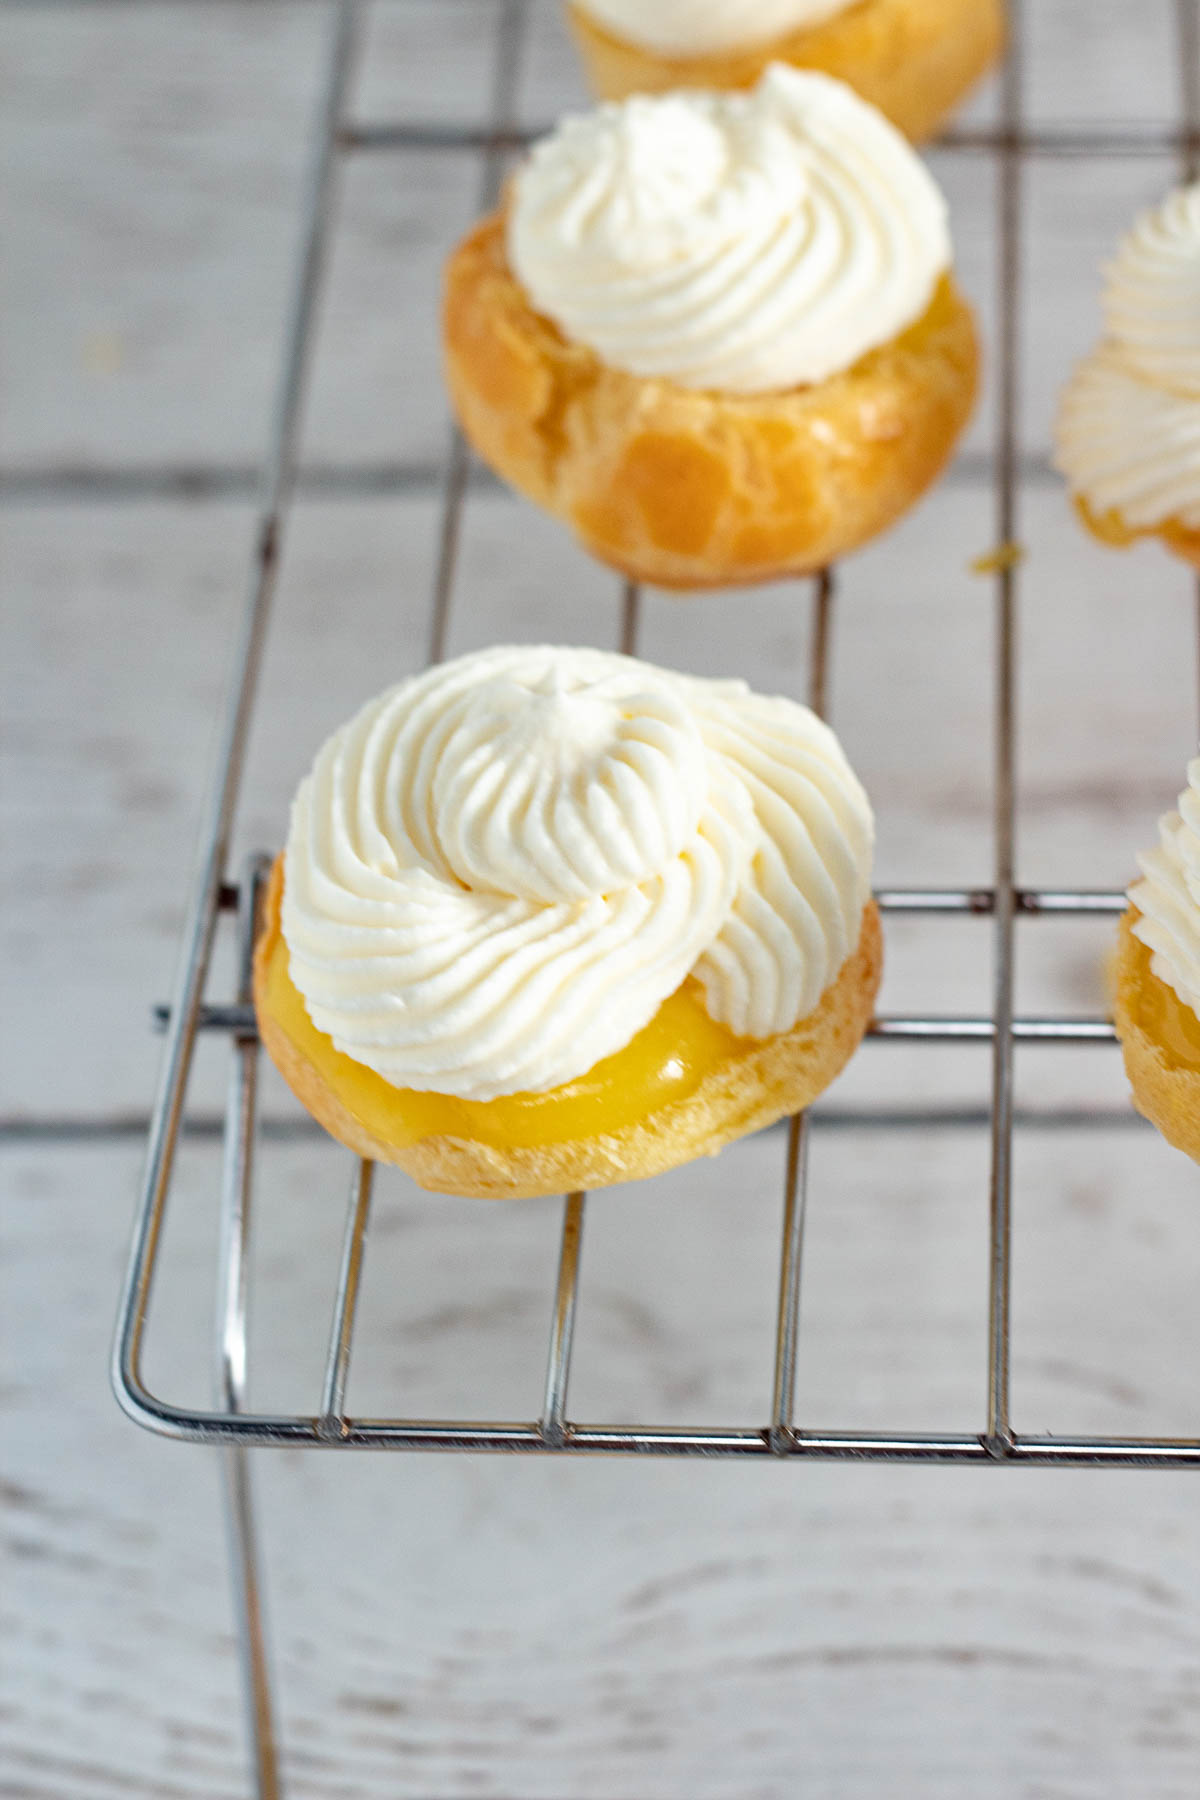 Lemon and cream cheese cream puff on a wire rack.